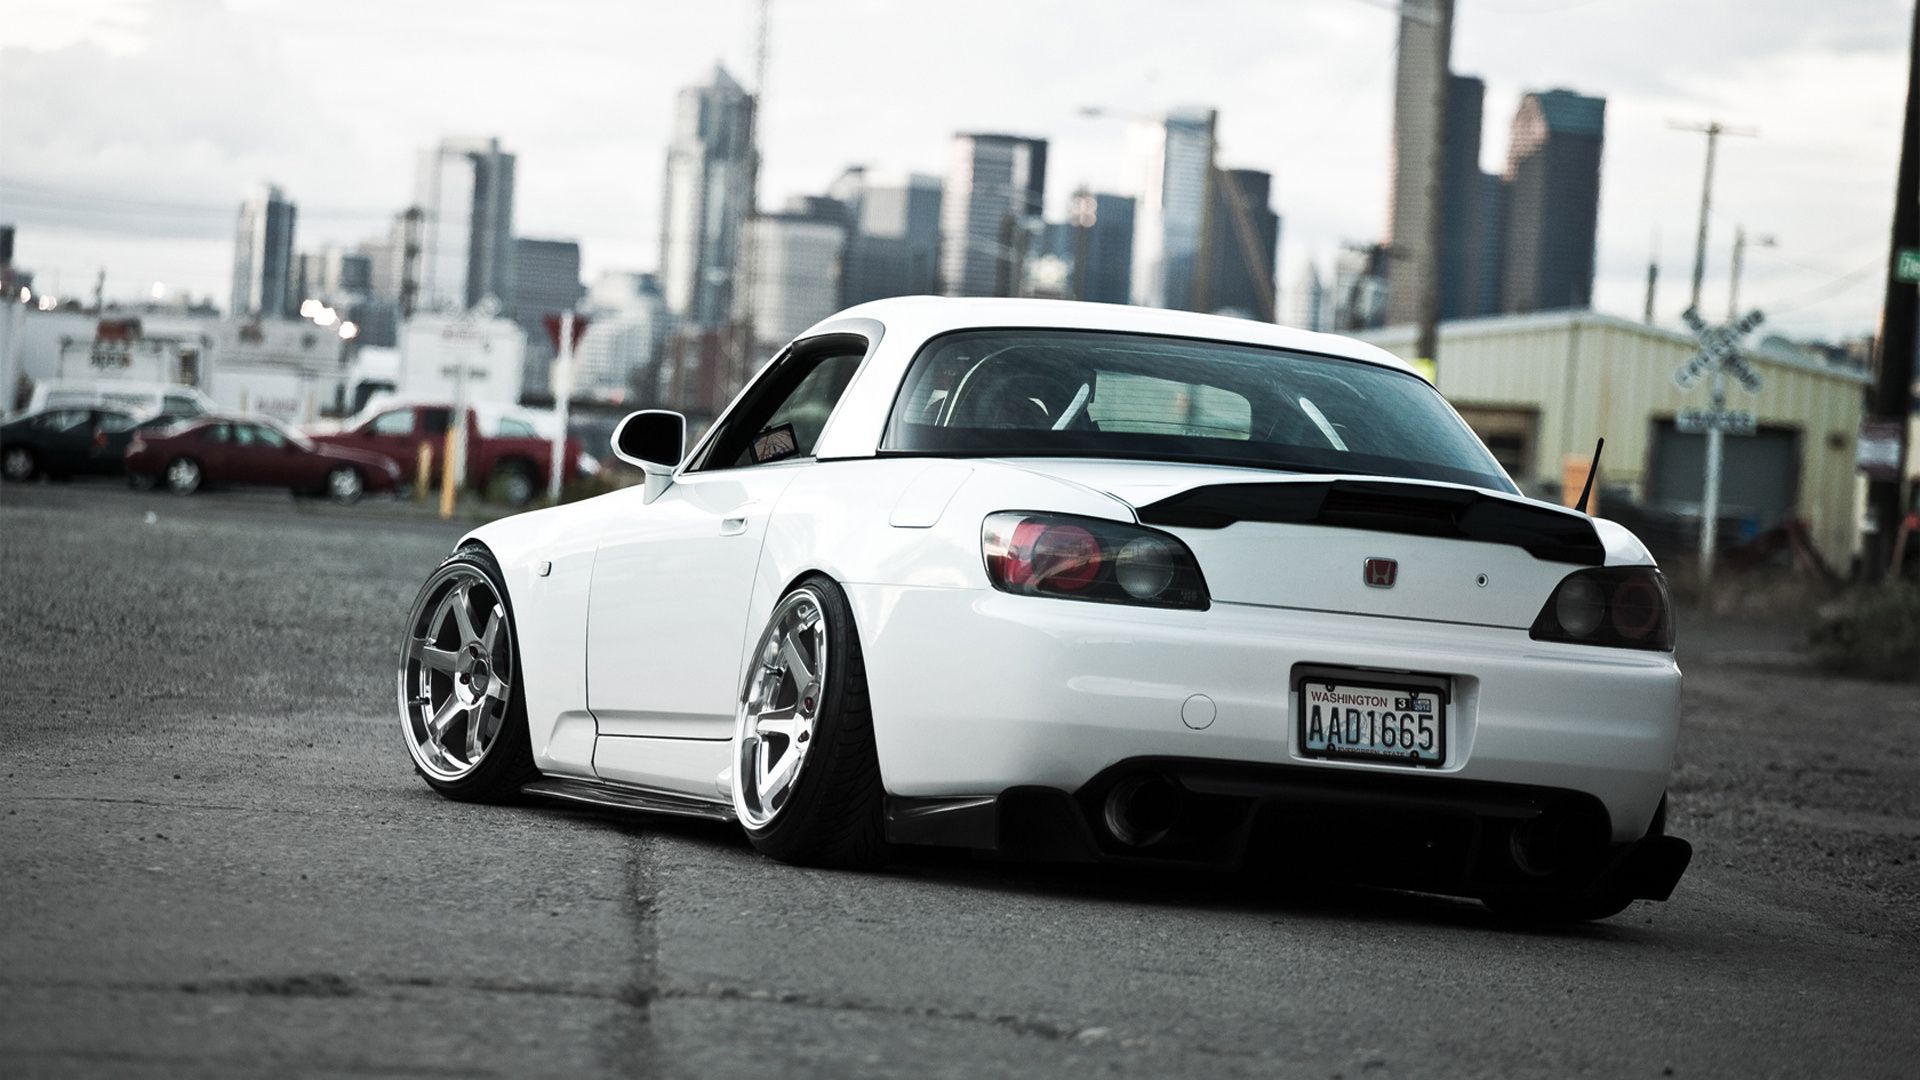 Free download stanced cars wallpaper Car Picture [1920x1080] for your Desktop, Mobile & Tablet. Explore Stanced Car Wallpaper. Stanced S2000 Wallpaper, Stance Wallpaper, Stance iPhone Wallpaper